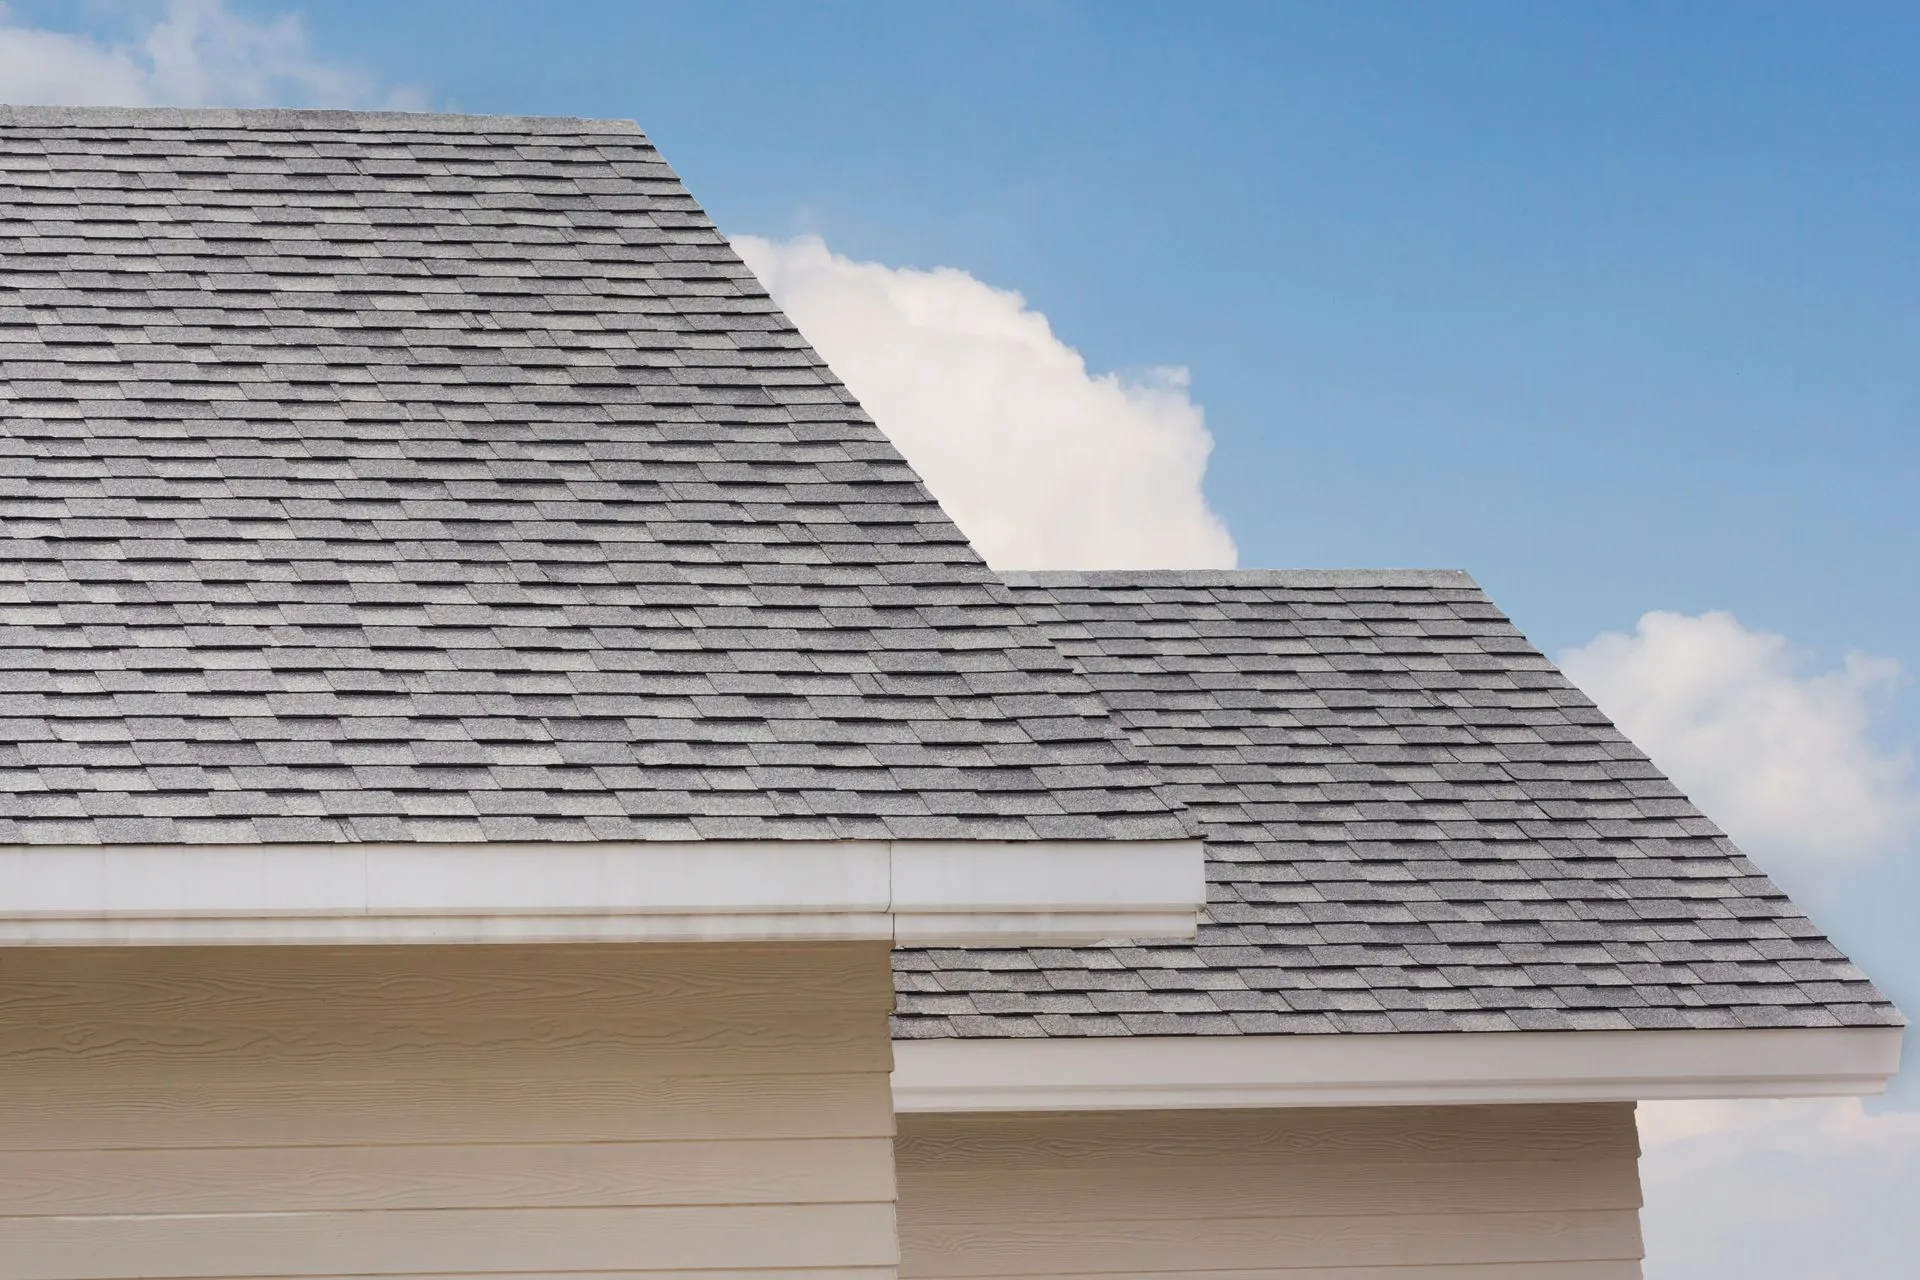 5 Weather Events That May Damage Your Roof